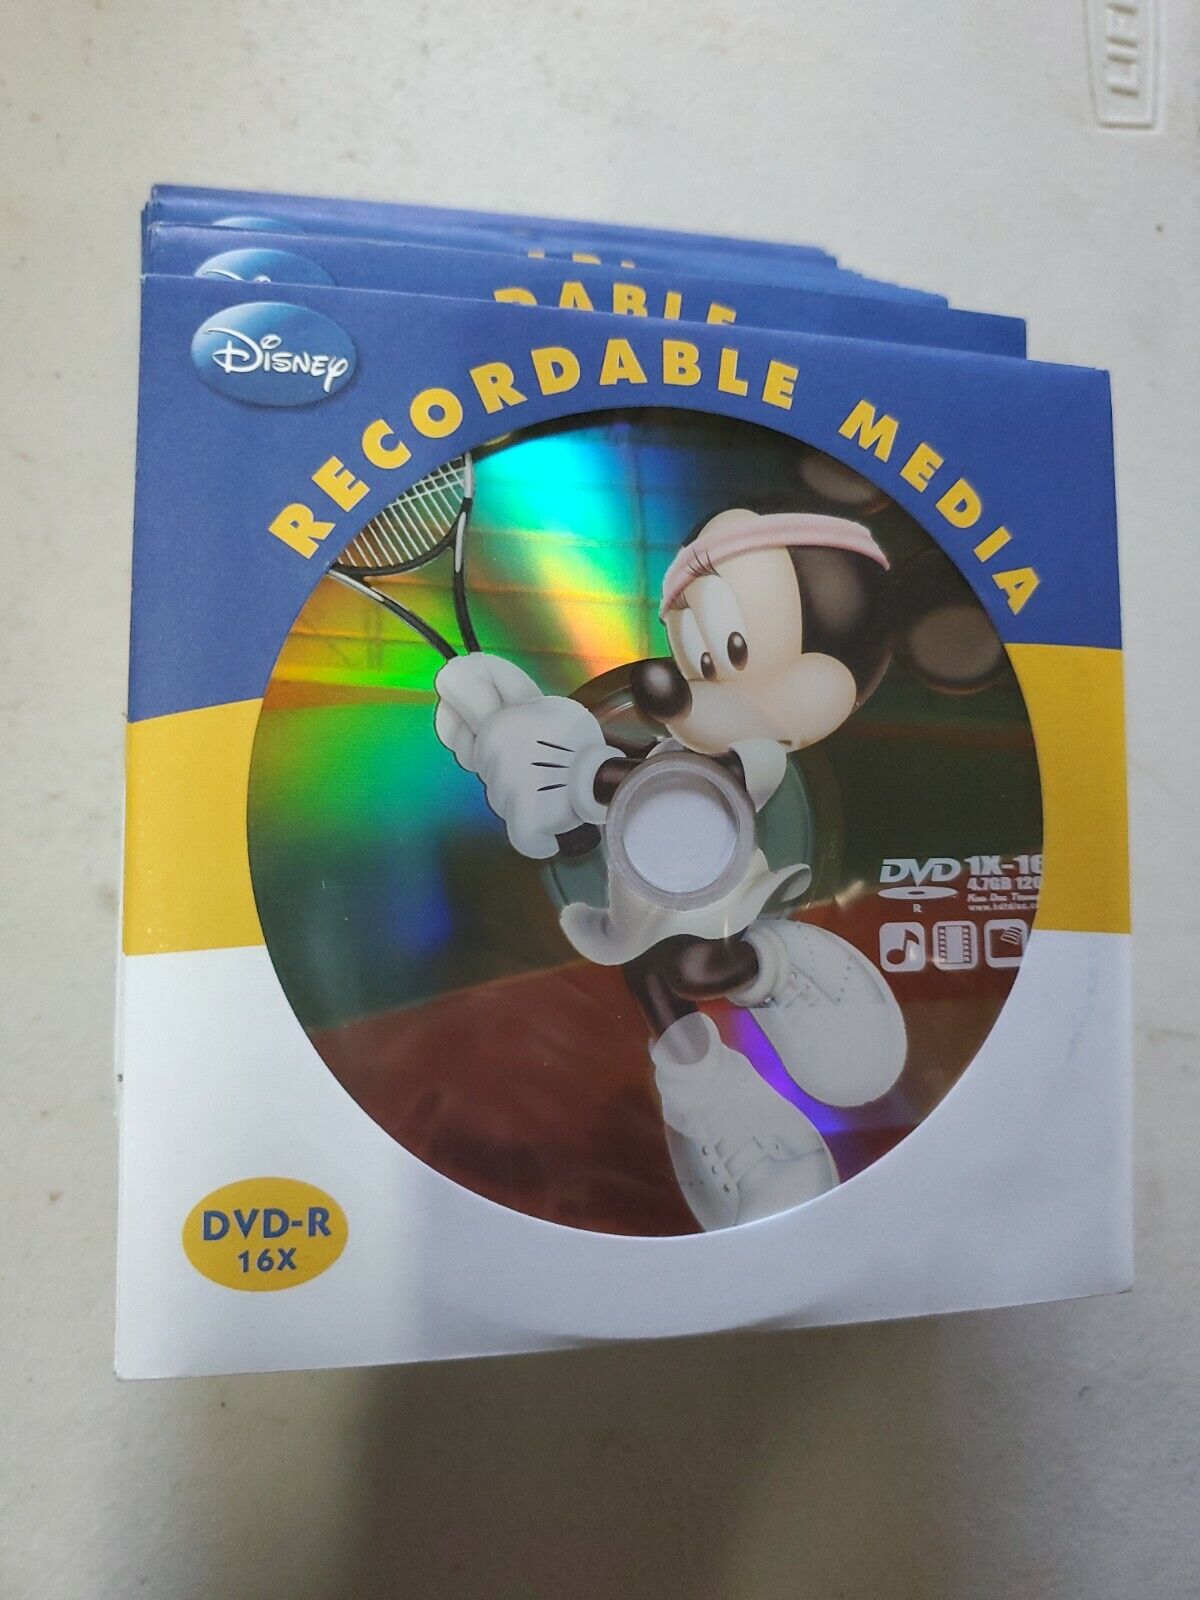 DVD-R Disney Minnie Mouse Premium Recordable 16X 4.7GB Blank New Sealed Separate